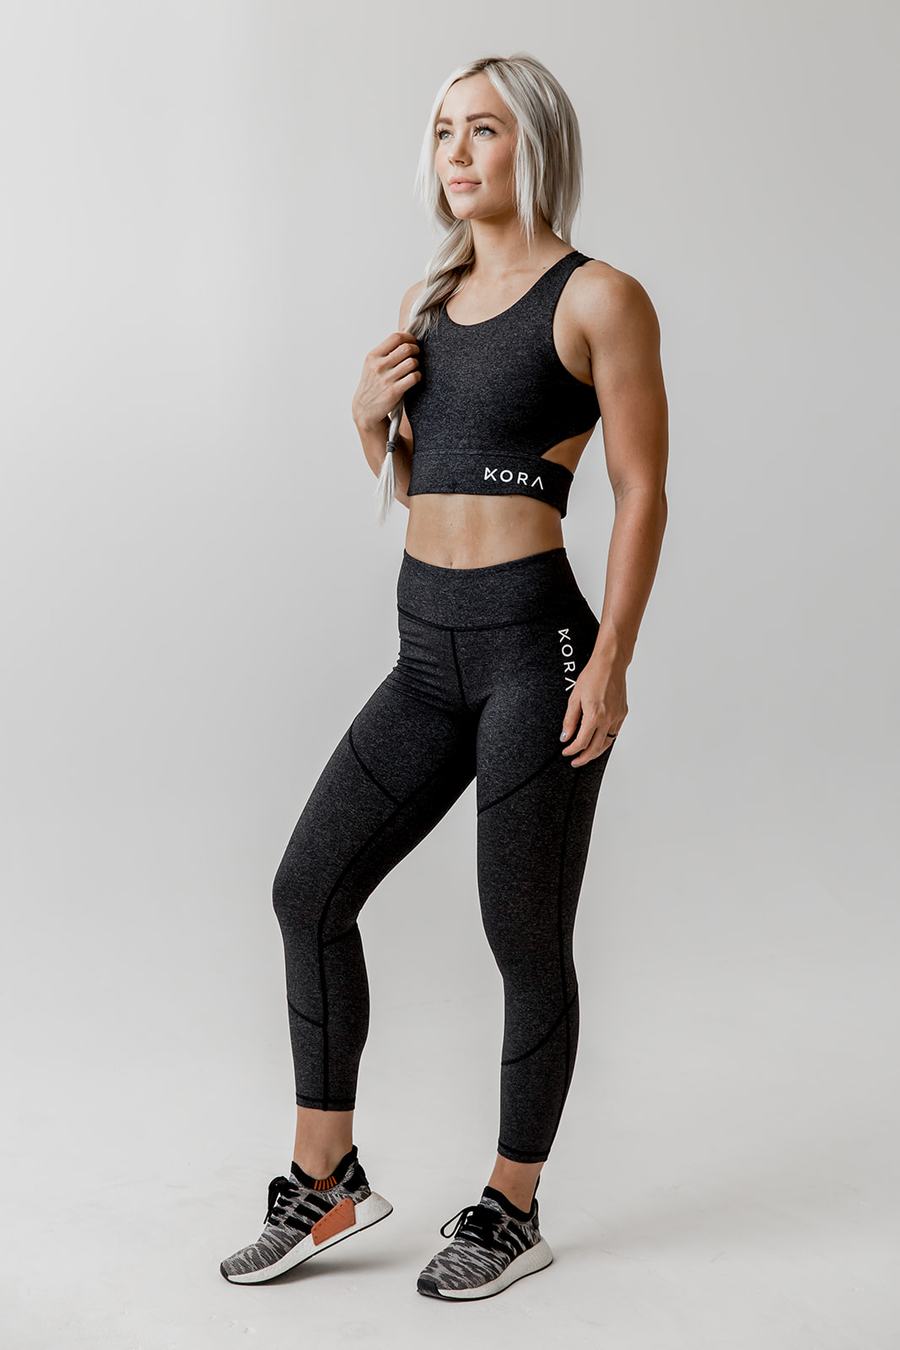 20 Buys From Kora Fitness That You Surely Won't Regret - Women Fitness